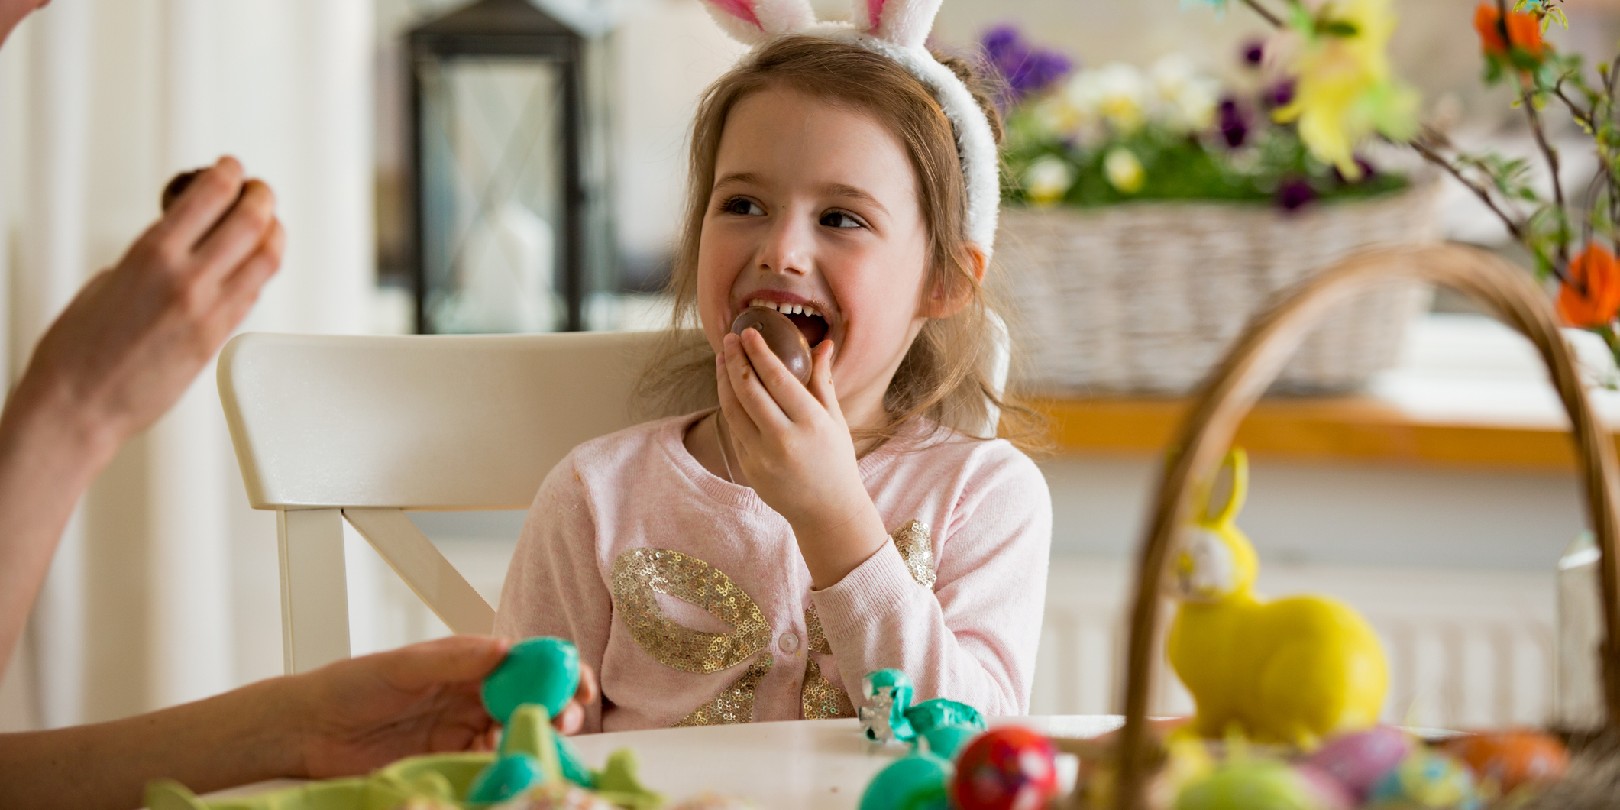 Mother and daughter celebrating Easter, eating chocolate eggs. Happy family holiday. Cute little girl in bunny ears laughing, smiling and having fun.